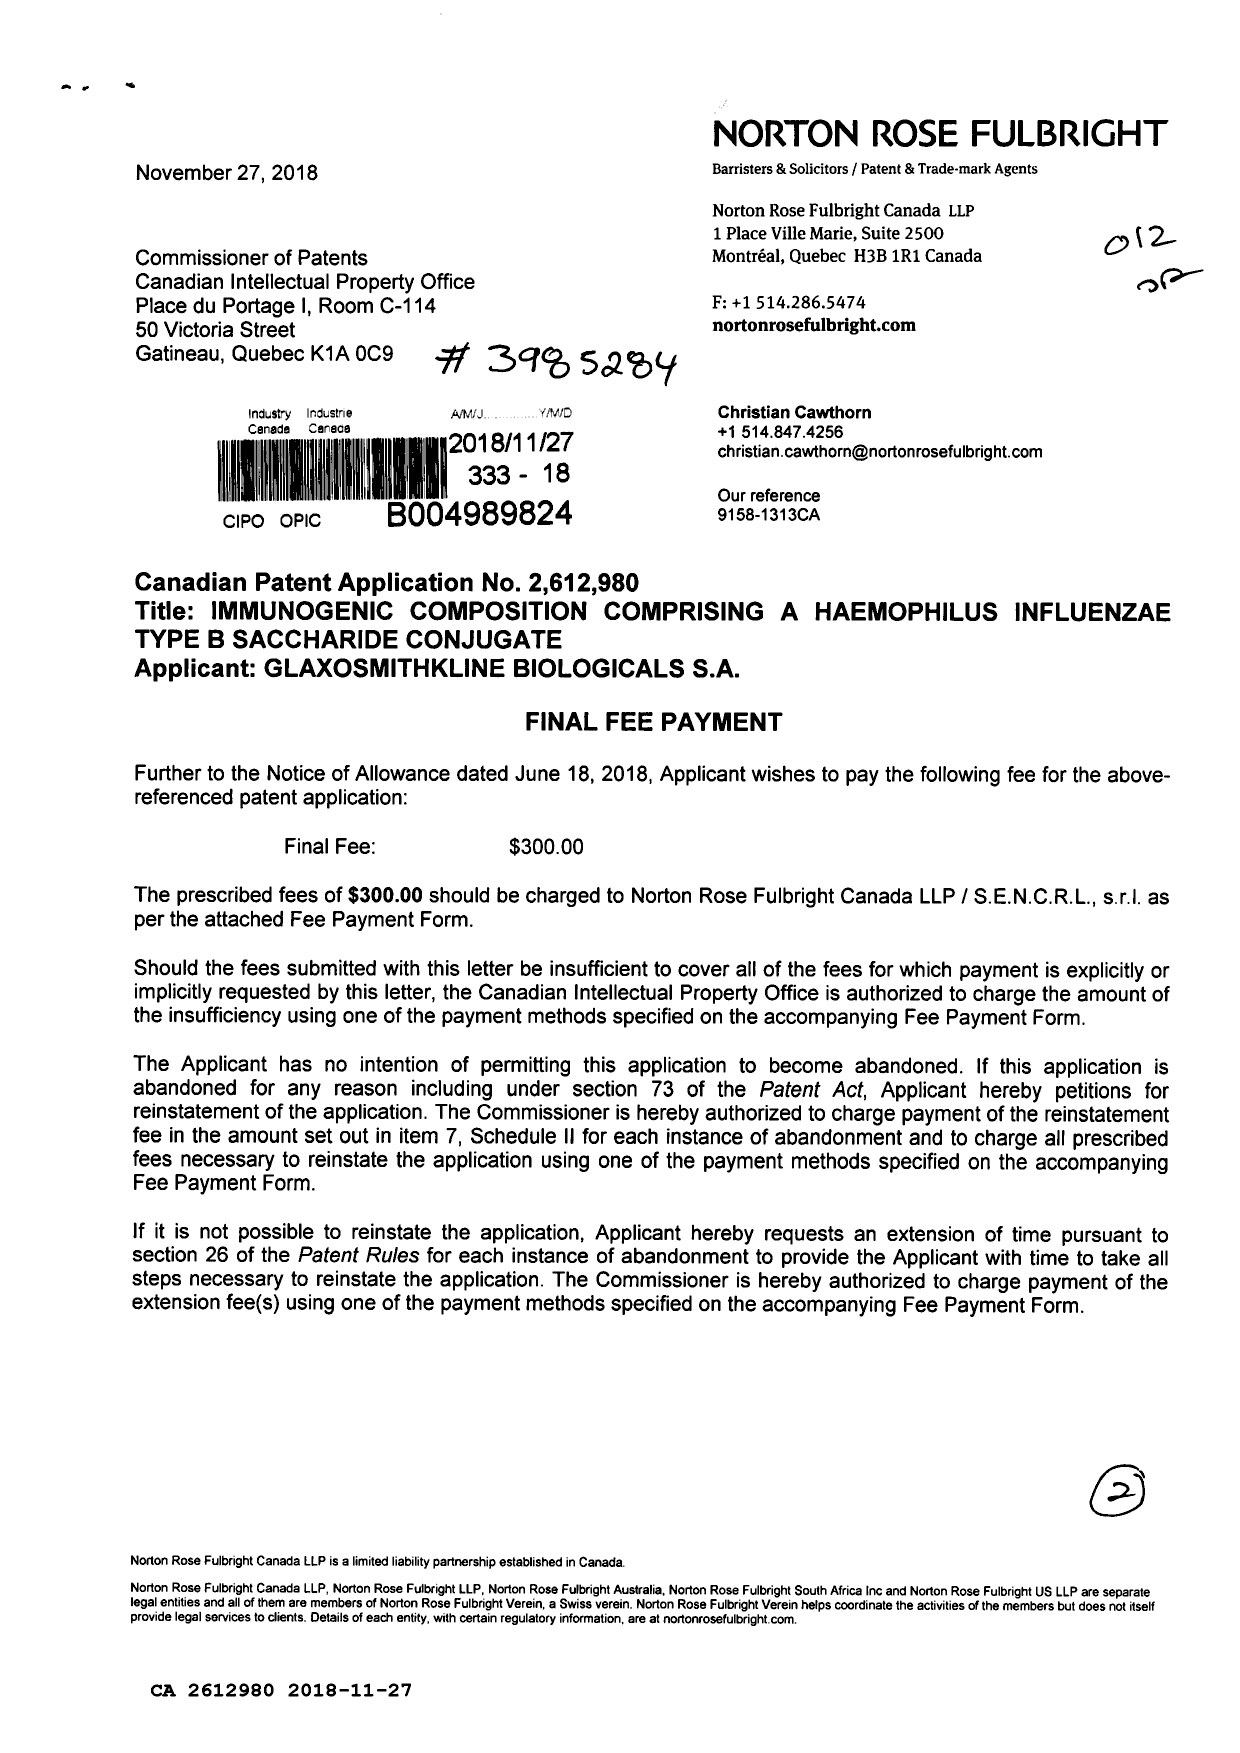 Canadian Patent Document 2612980. Final Fee 20181127. Image 1 of 2